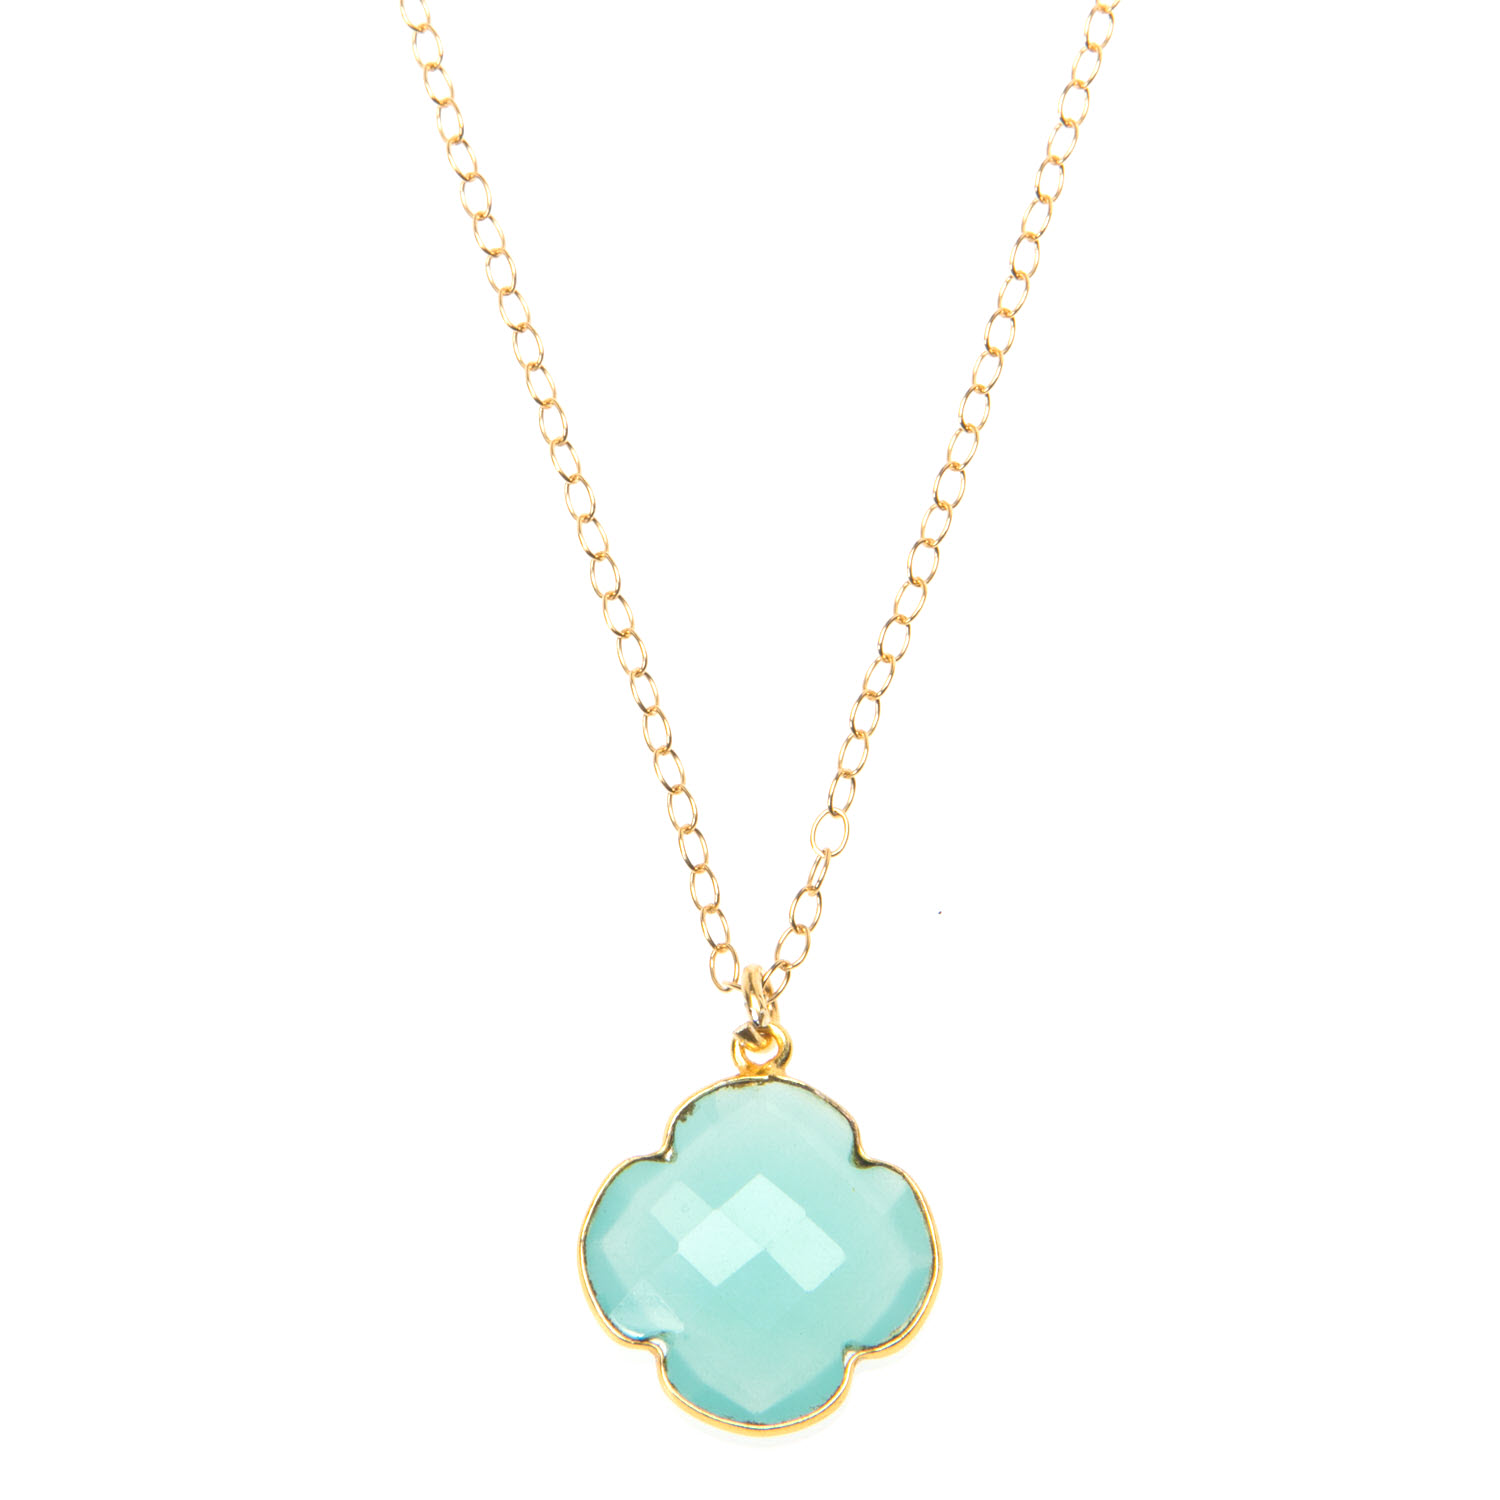 Aqua Blue Chalcedony and Gold Vermeil Necklace